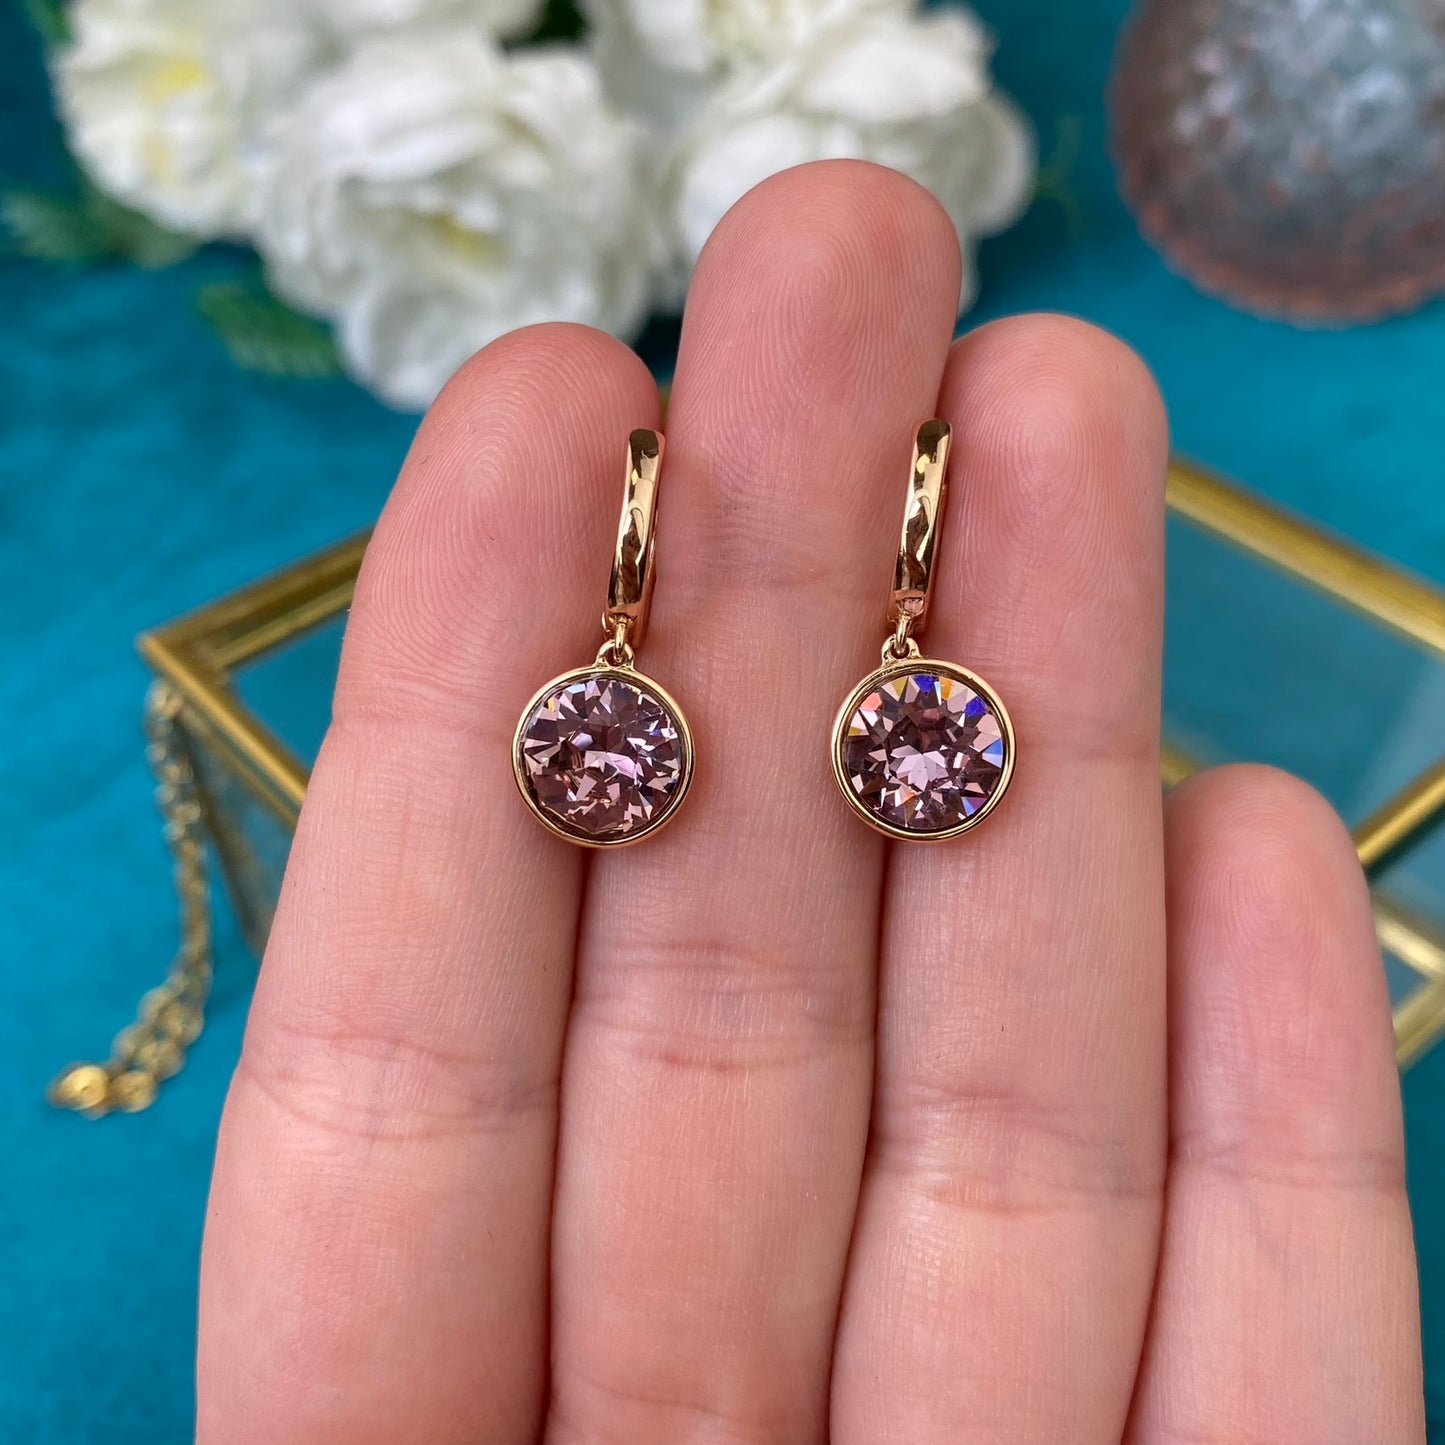 Gold Plated Stainless Steel Earrings-rings with decorative pale pink crystal